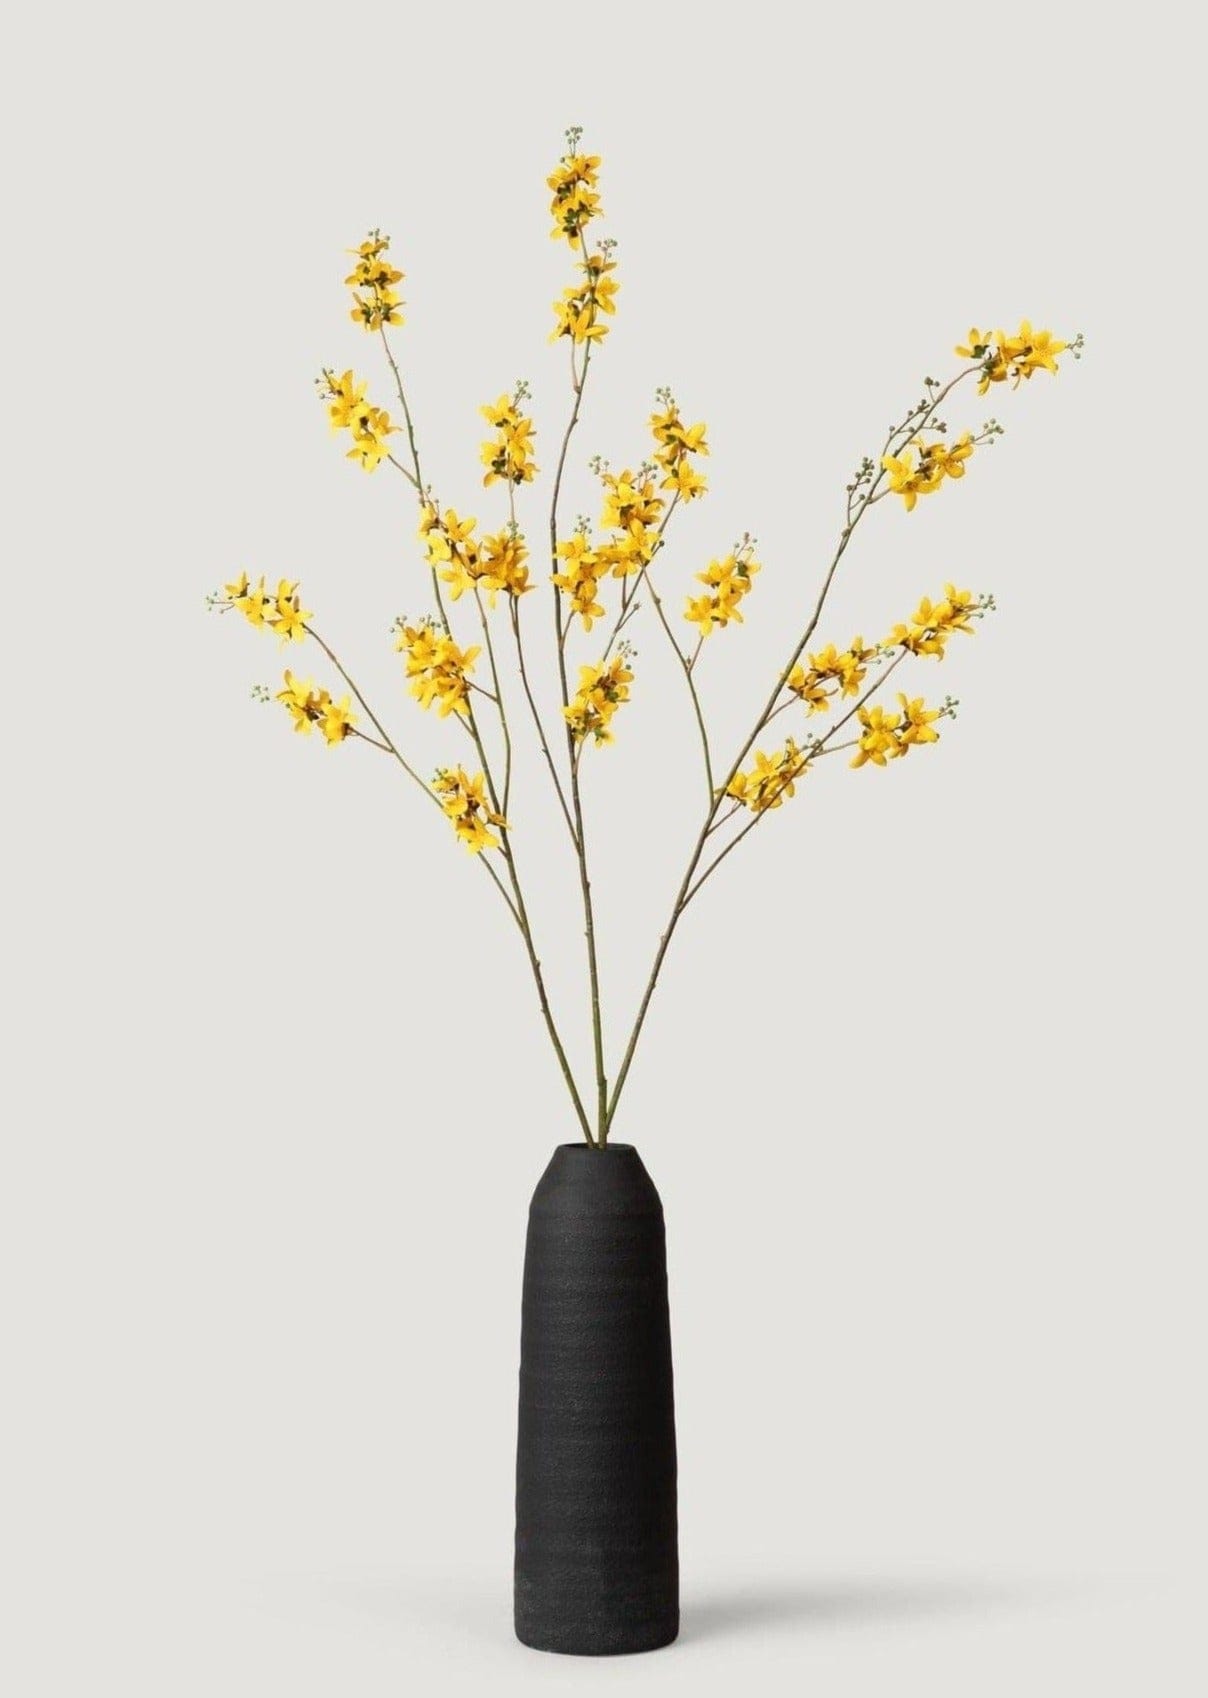 Faux Spring Forsythia Branches Styled in Tall Black Vase